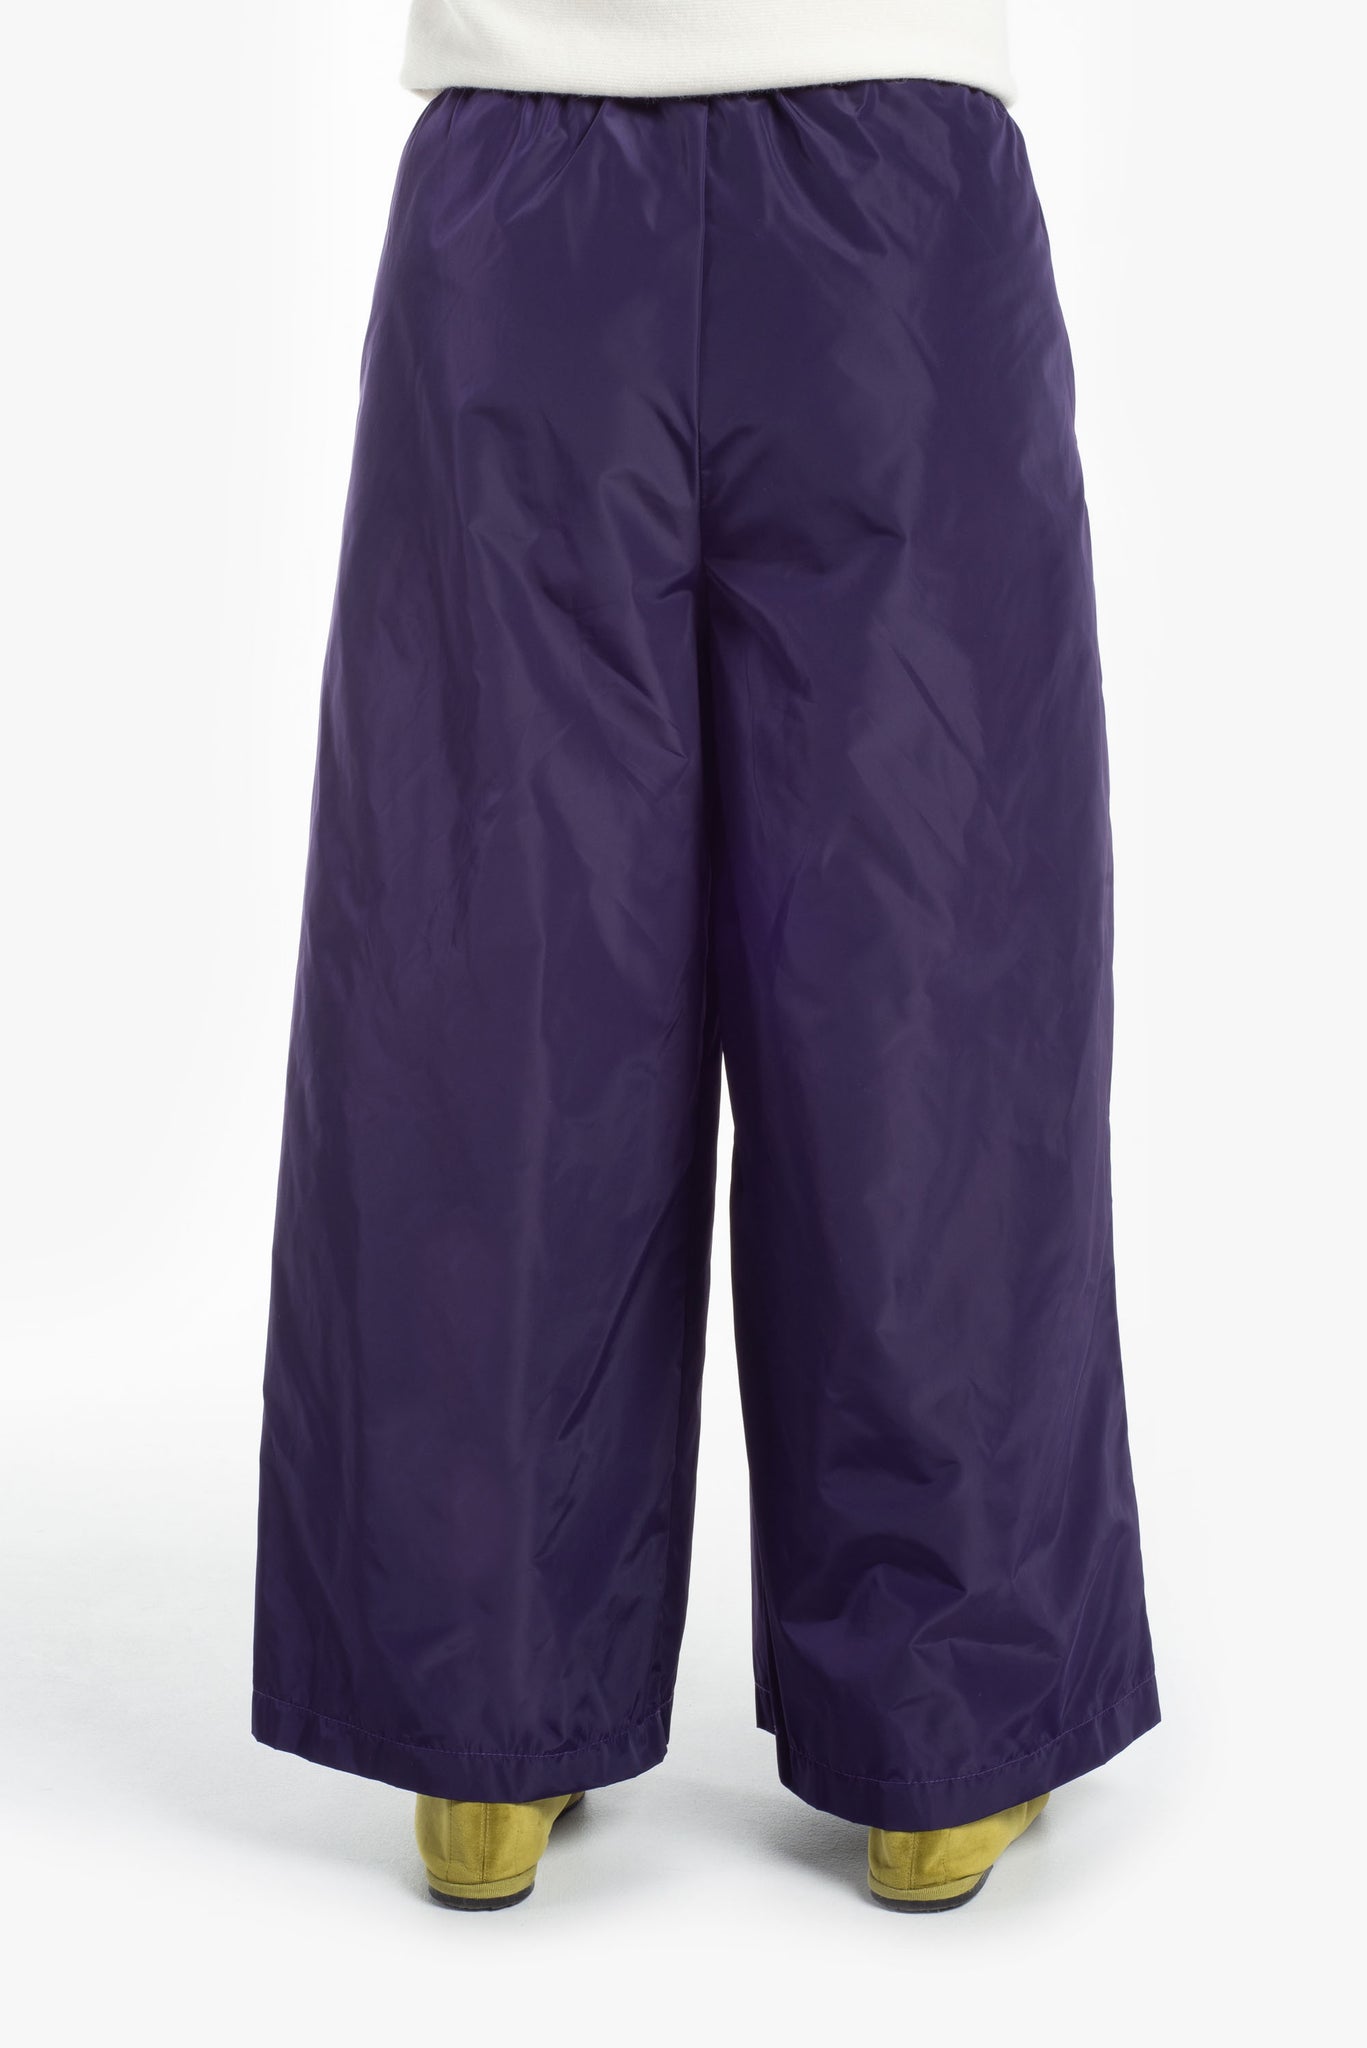 Baggy trousers with elastication and drawstring at the waist